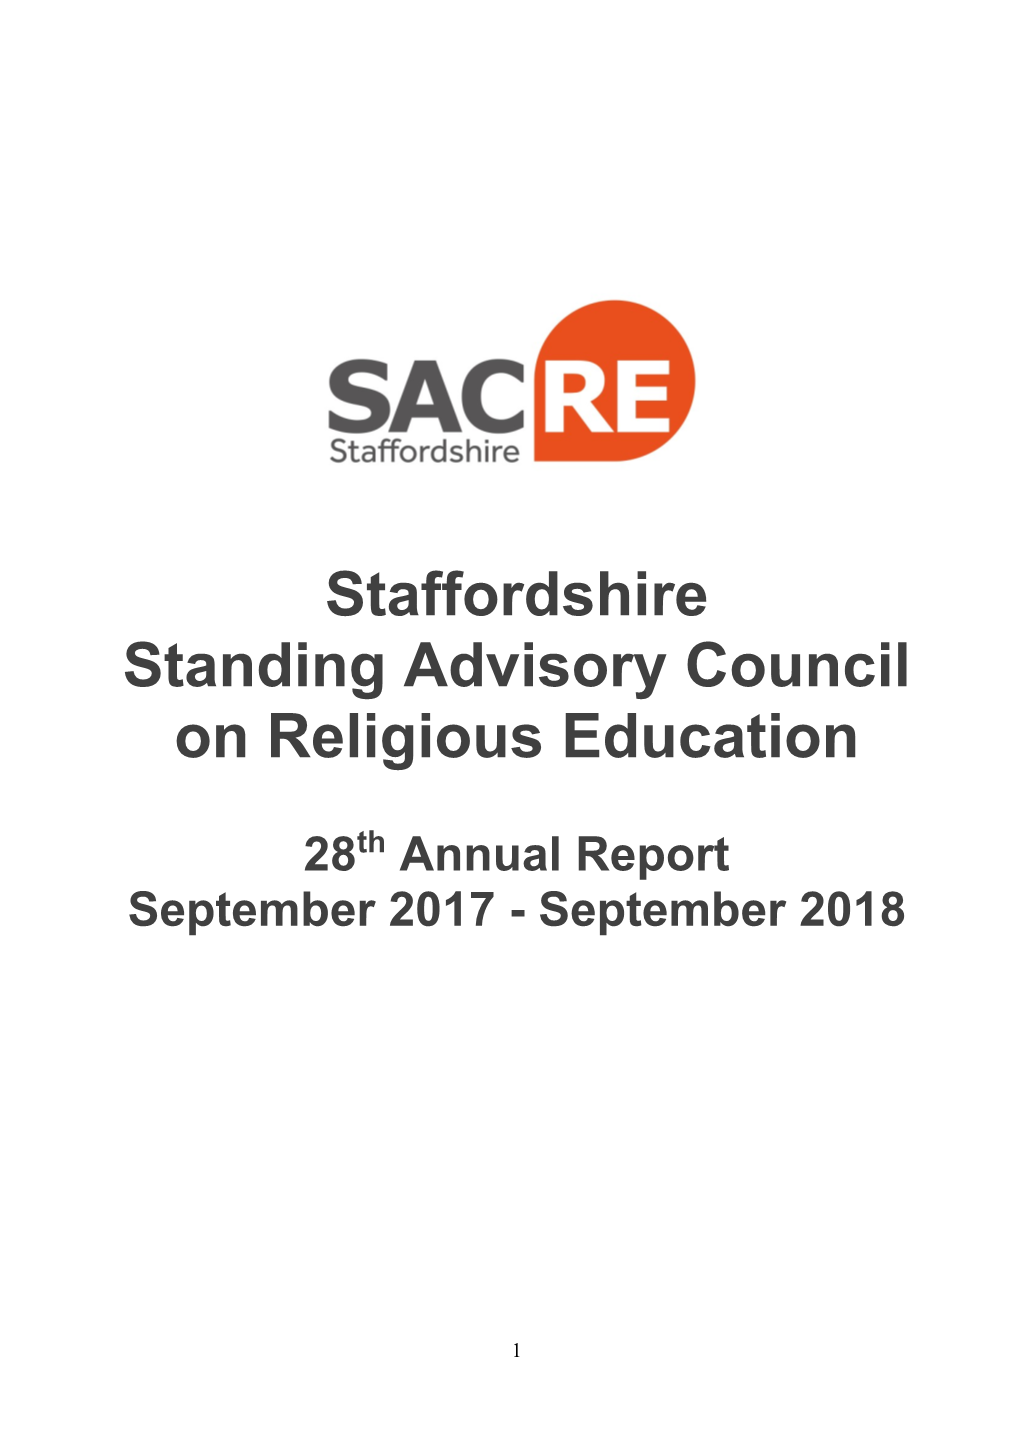 Staffordshire Standing Advisory Council on Religious Education